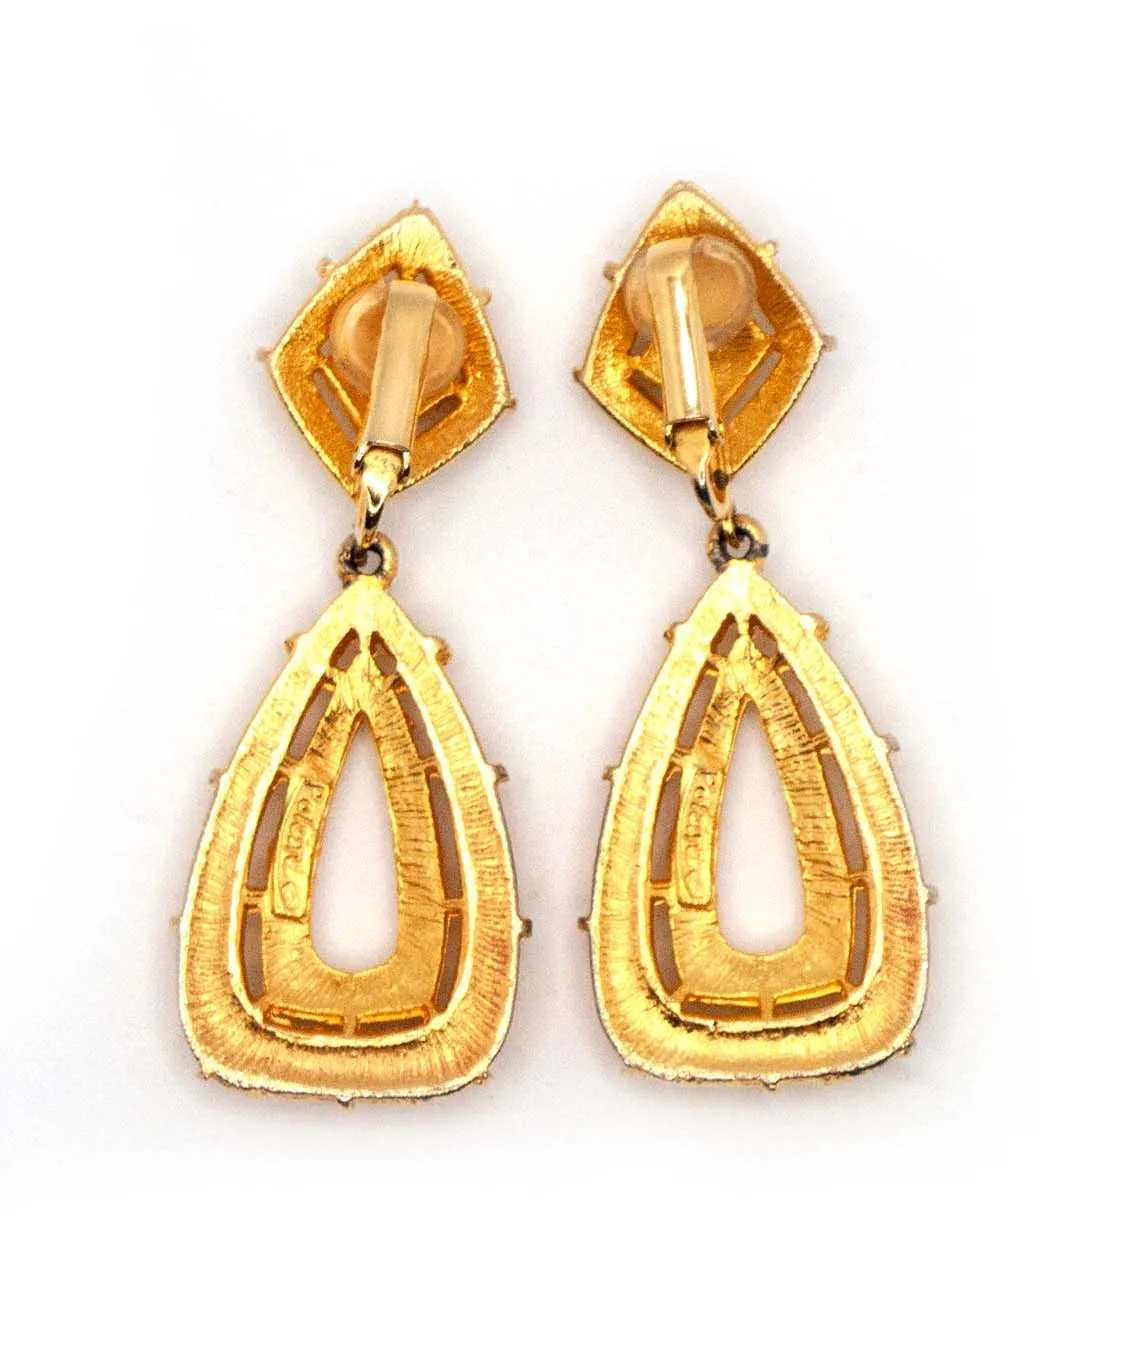 Gold bamboo earrings by Polcini reverse